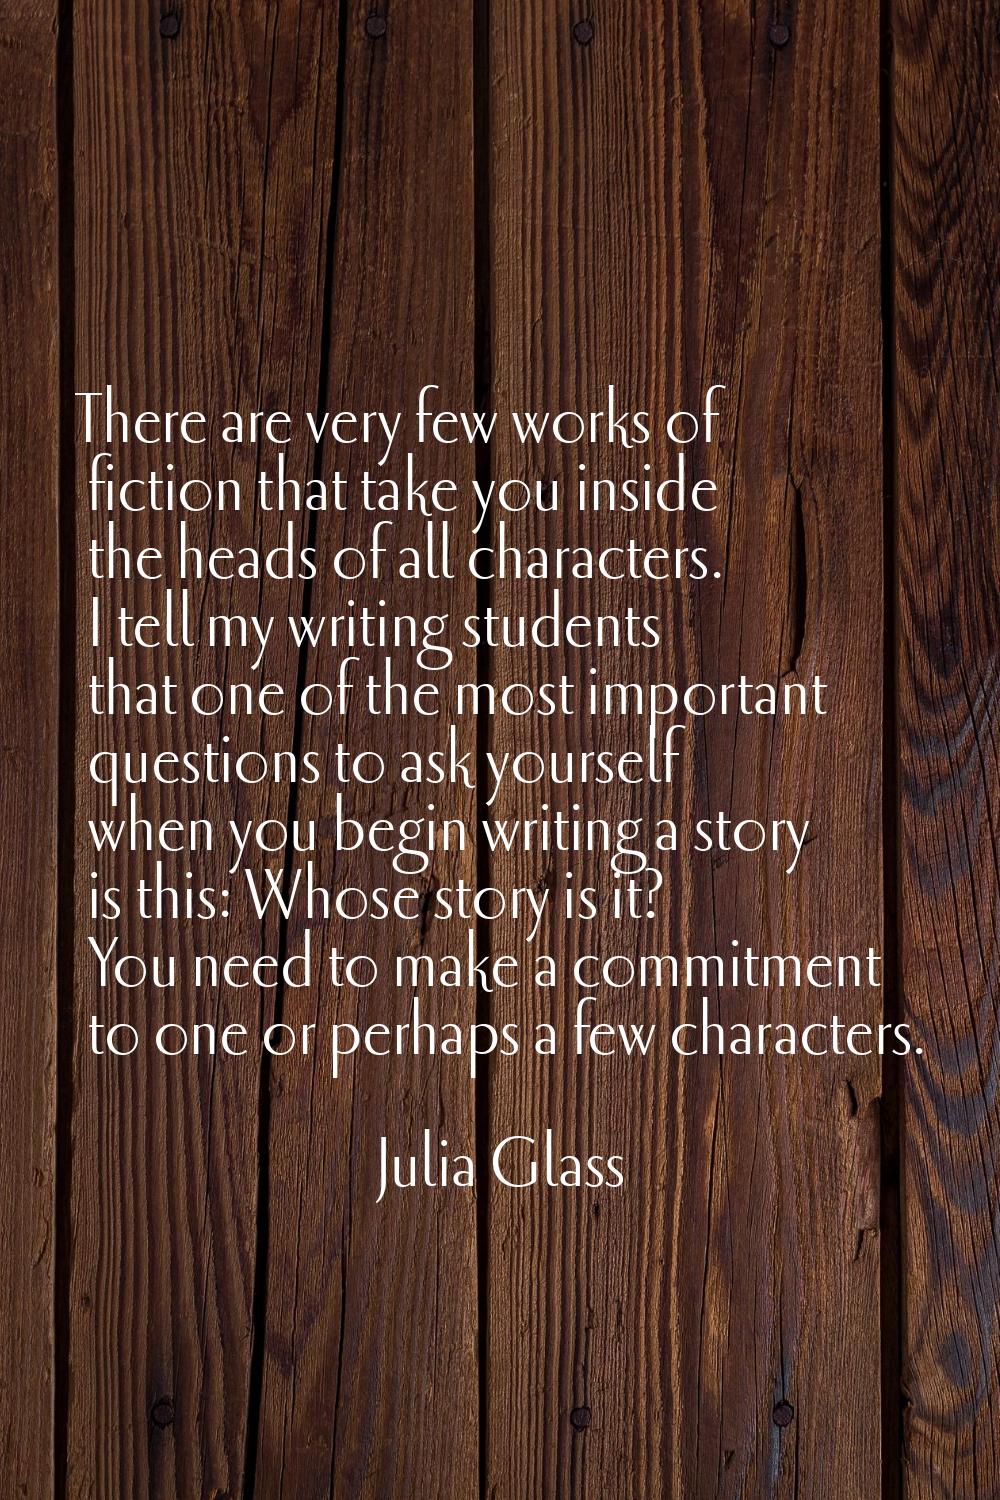 There are very few works of fiction that take you inside the heads of all characters. I tell my wri